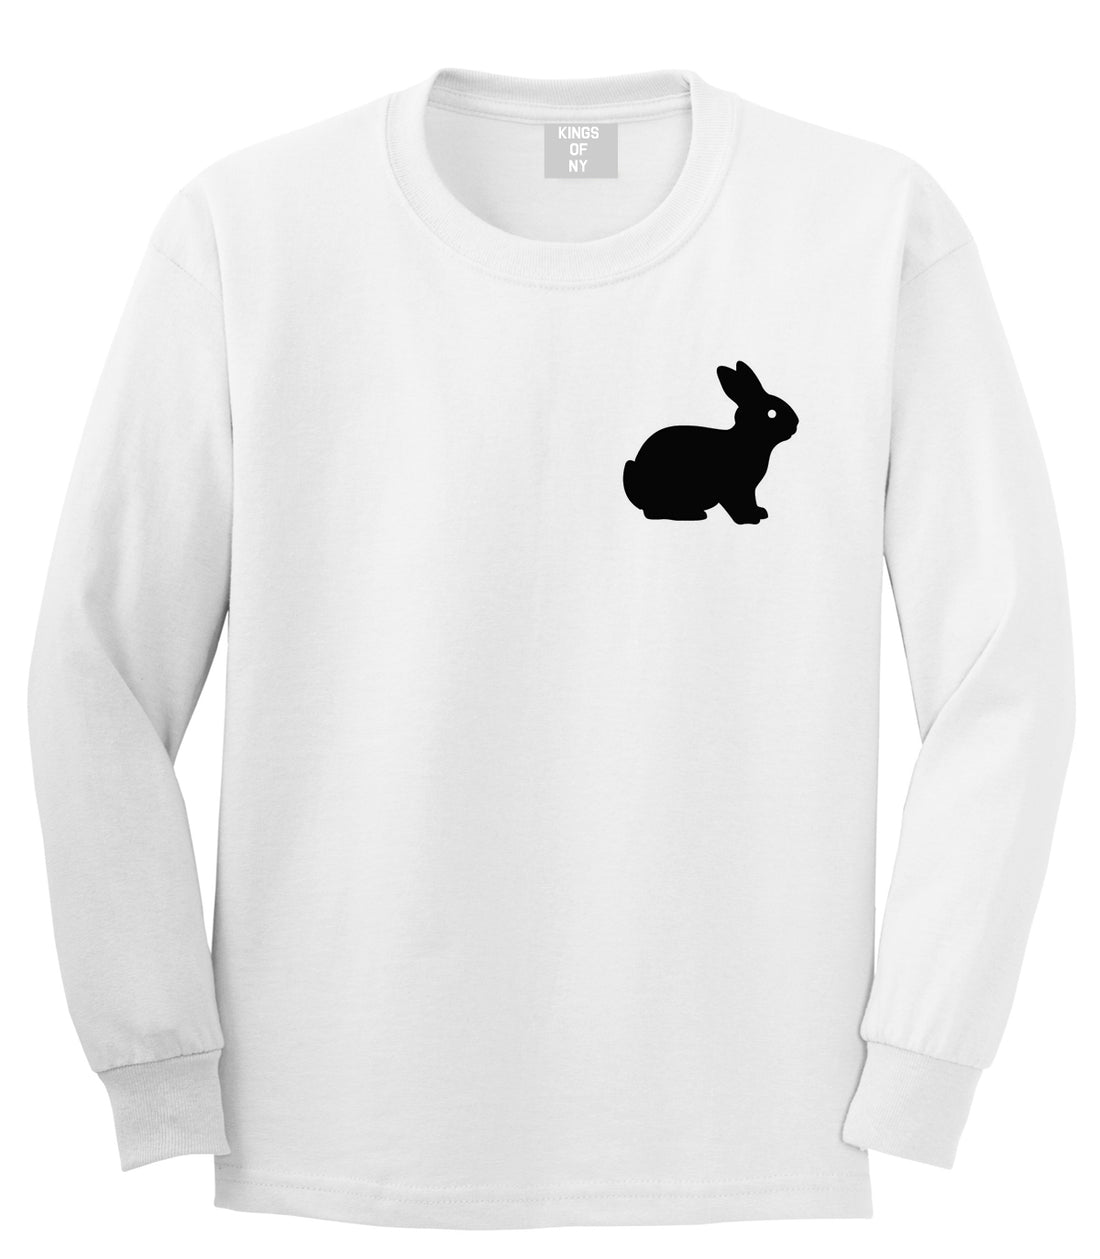 Bunny Rabbit Easter Chest White Long Sleeve T-Shirt by Kings Of NY